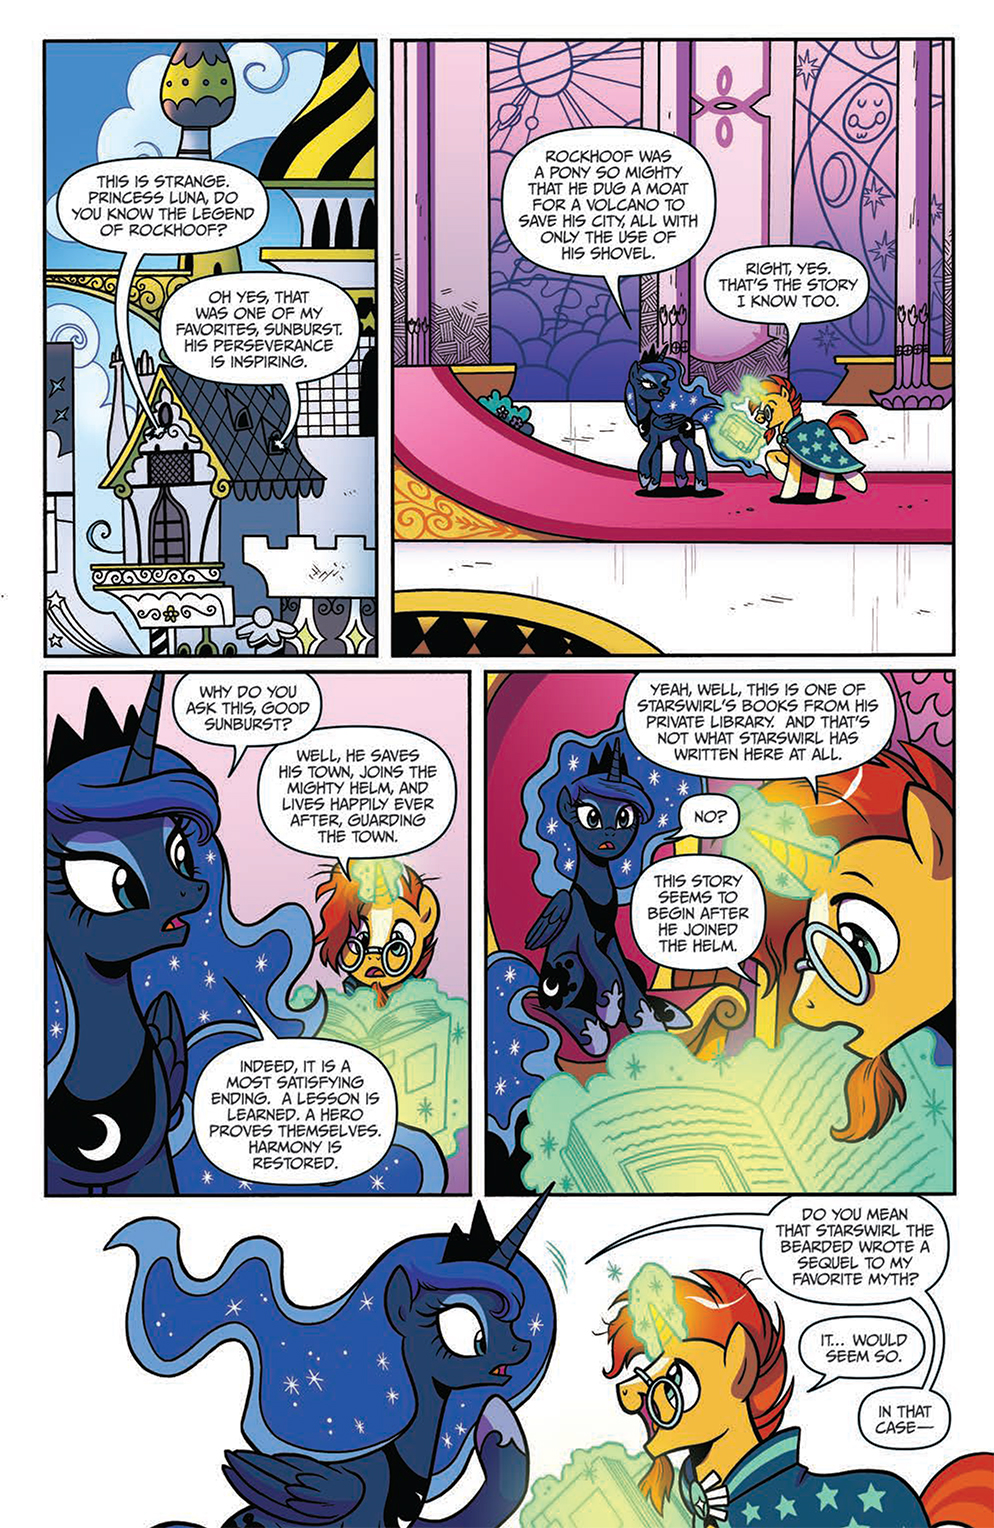 EXCLUSIVE PREVIEW: My Little Pony: Legends of Magic #2 - IDW Publishing